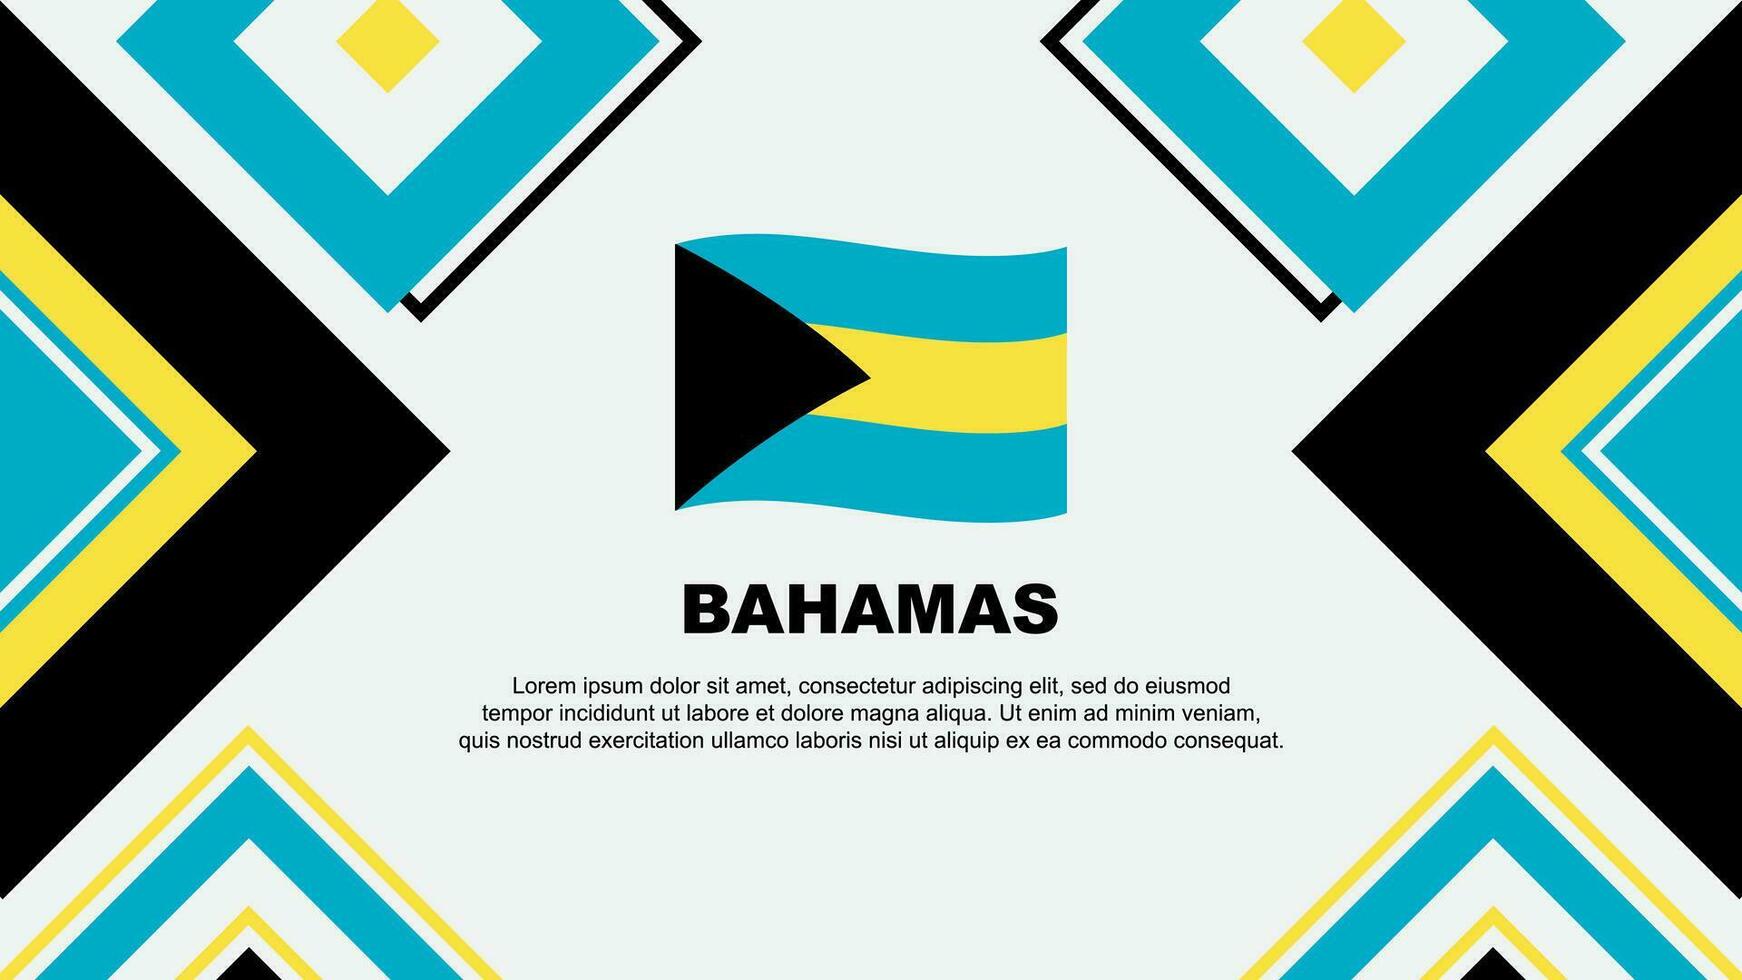 Bahamas Flag Abstract Background Design Template. Bahamas Independence Day Banner Wallpaper Vector Illustration. Bahamas Independence Day